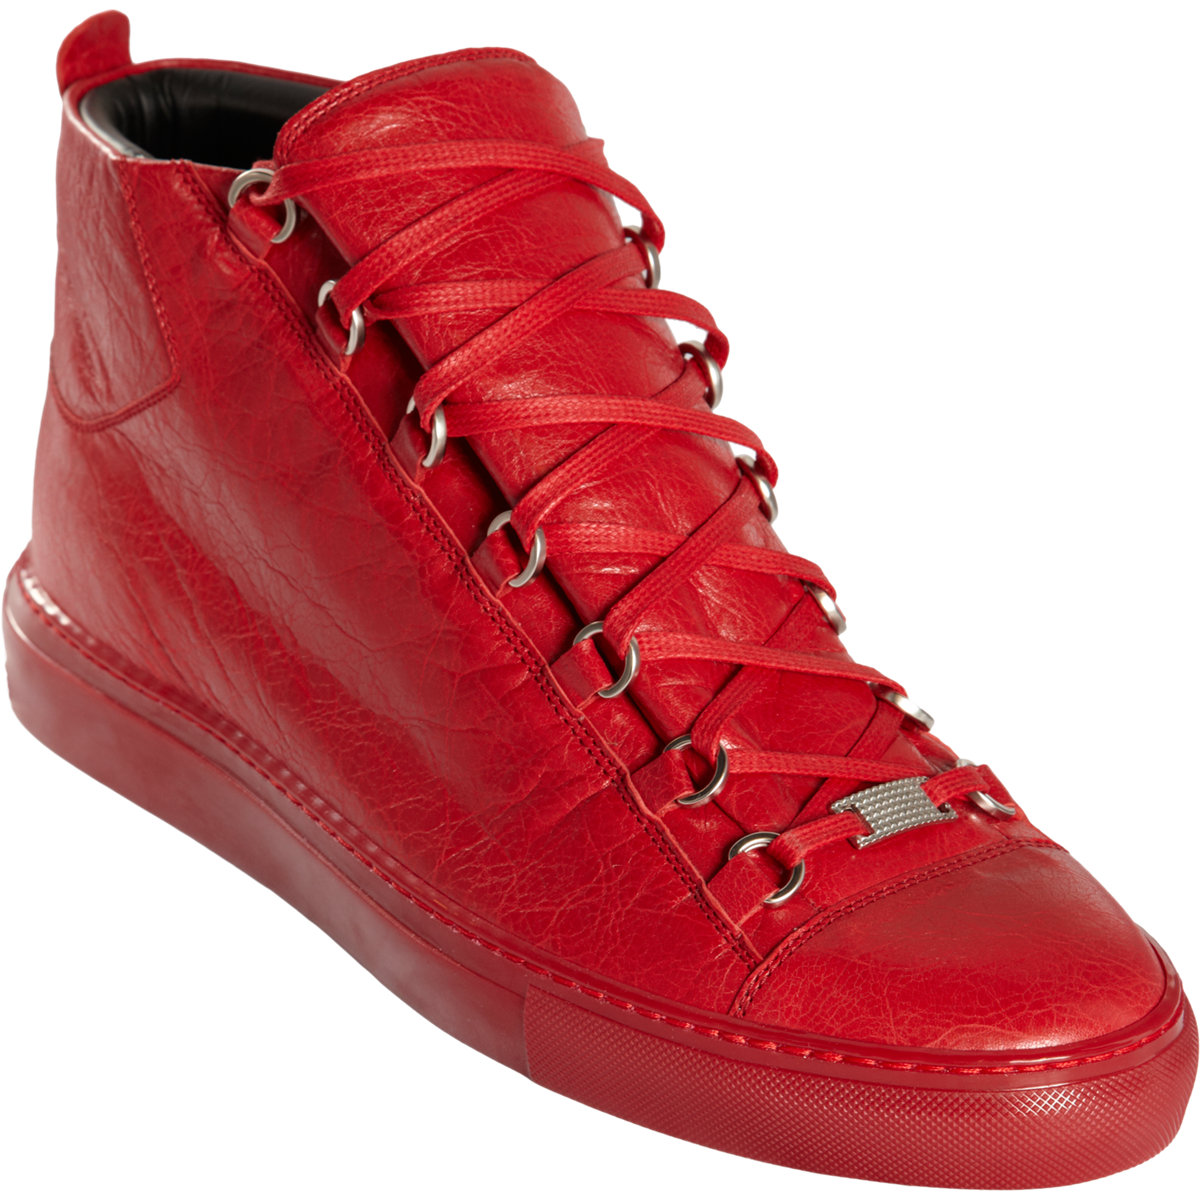 Balenciaga Arena Leather High Top Sneakers in Red for Men